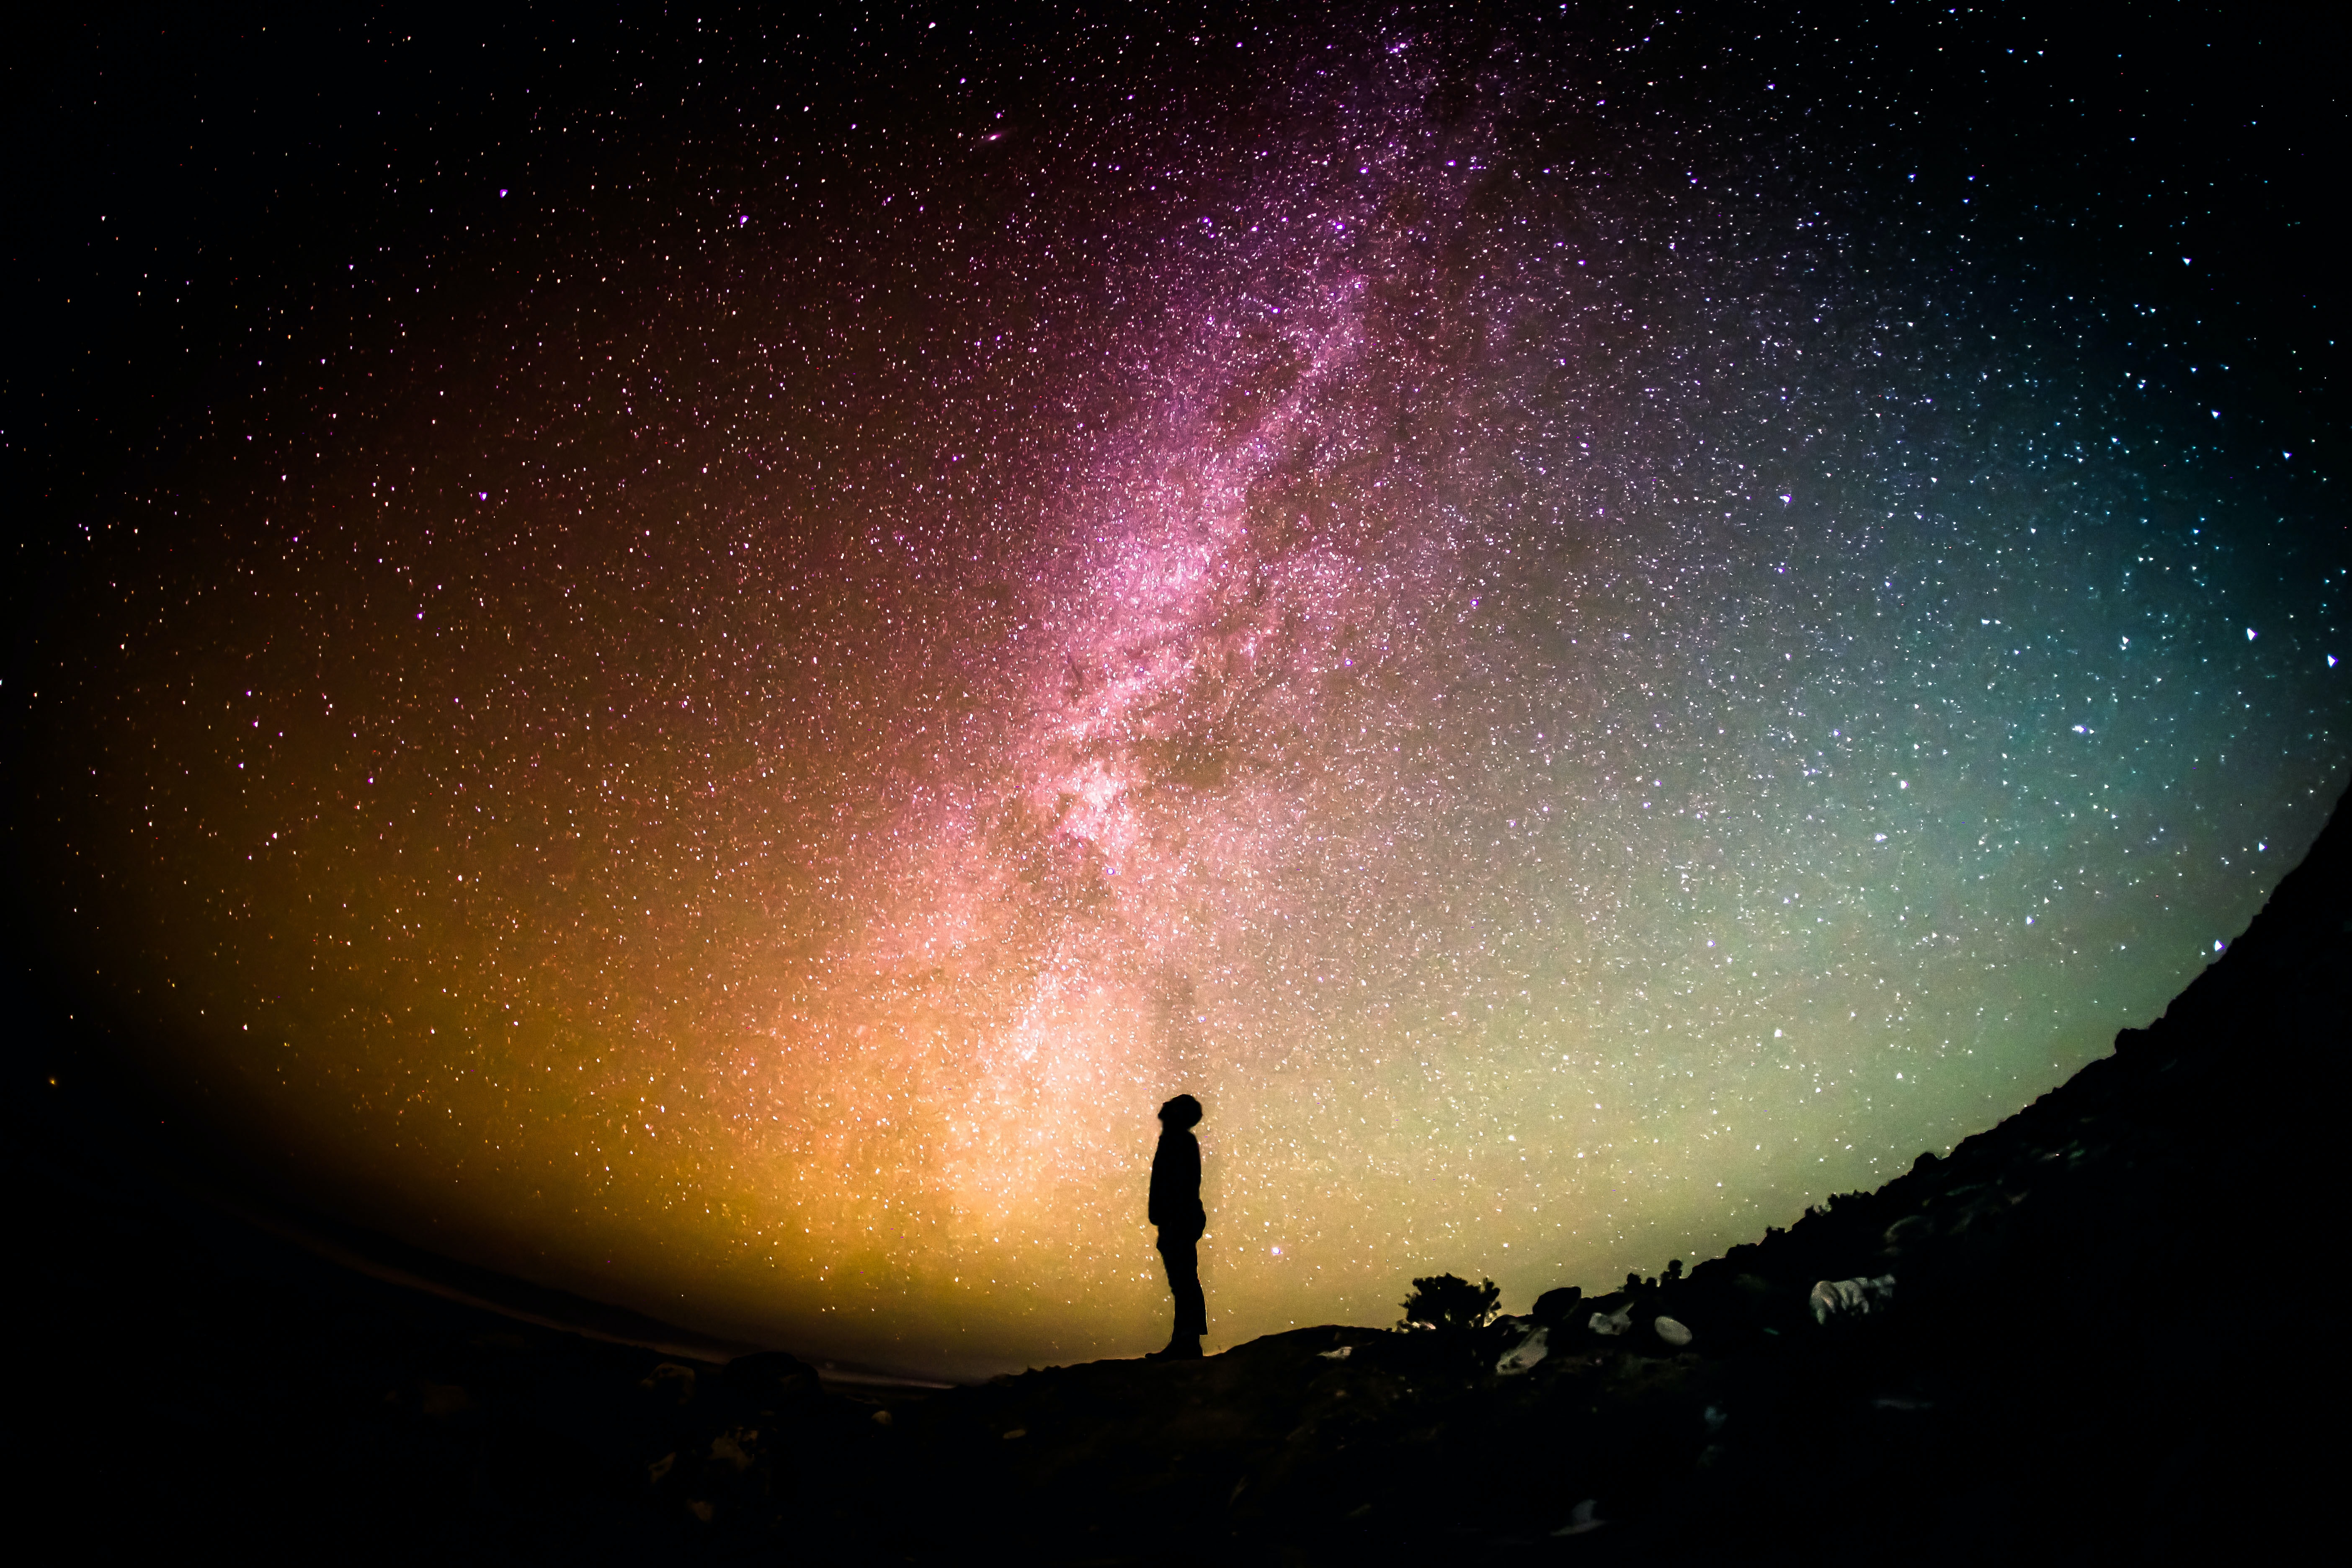 A person looking up at the night sky with the milky way above them.